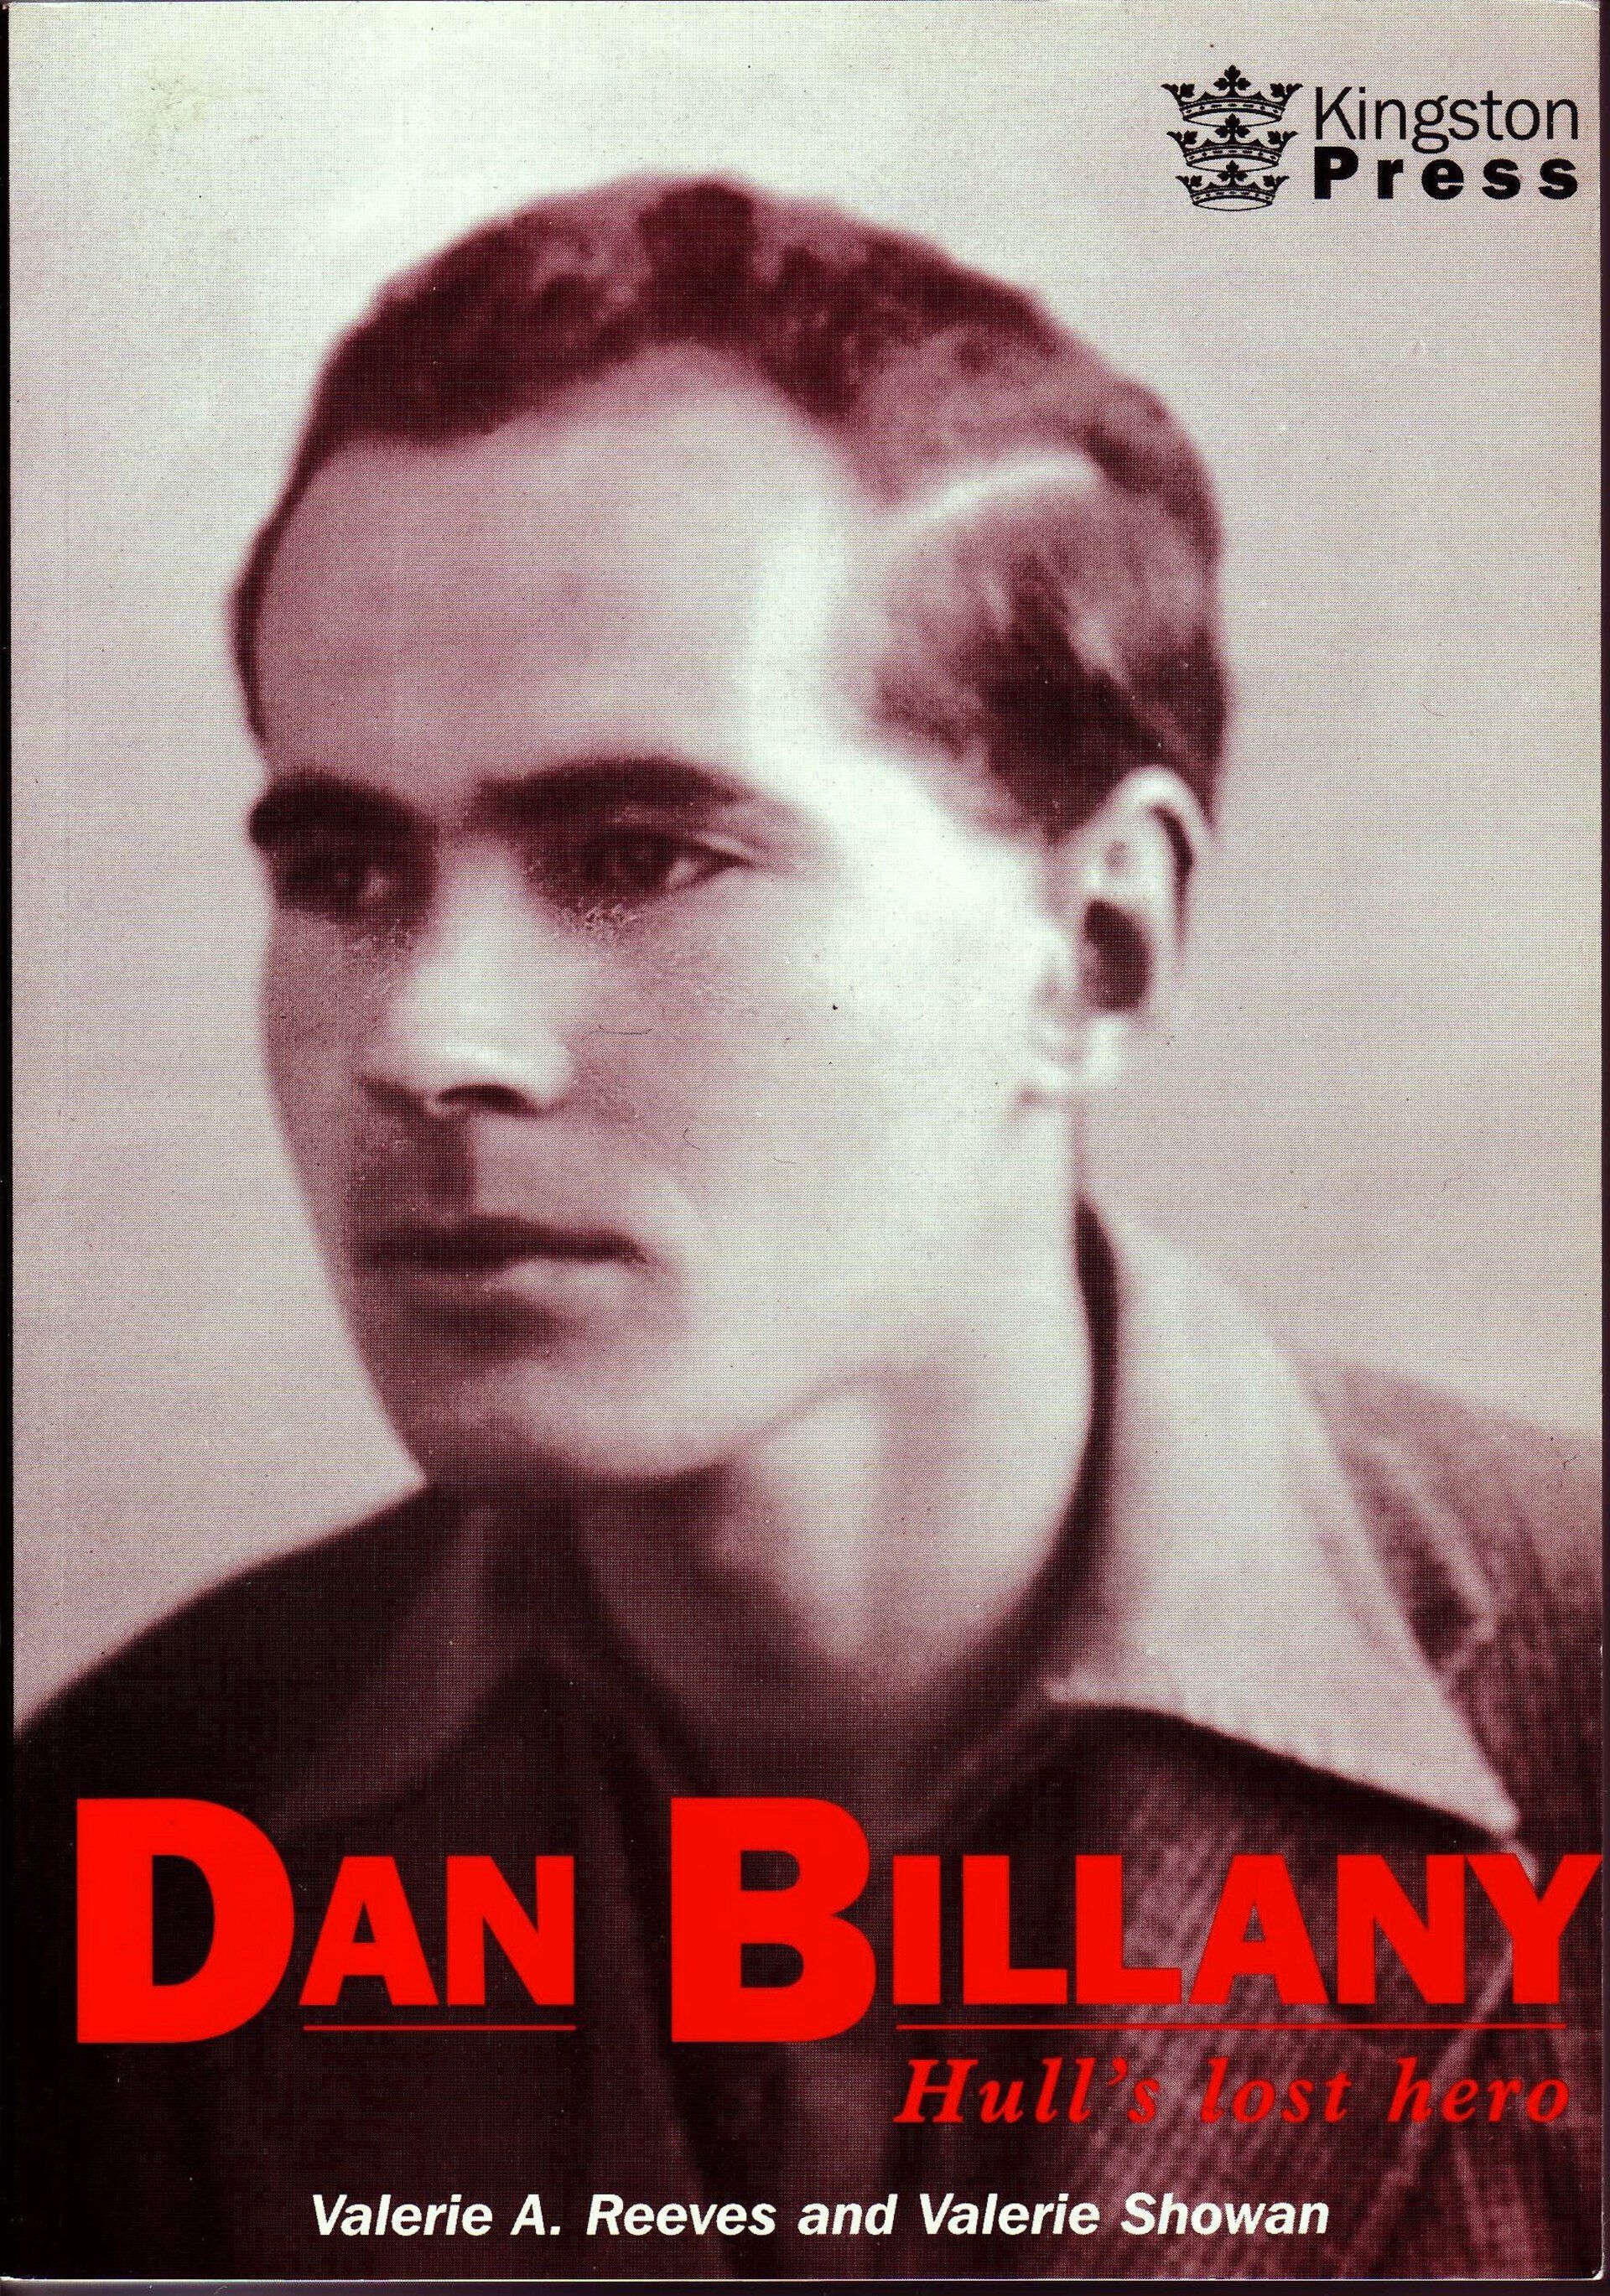 Dan Billany - Hull's Lost Hero by Valerie A. Reeves and Valerie Showan